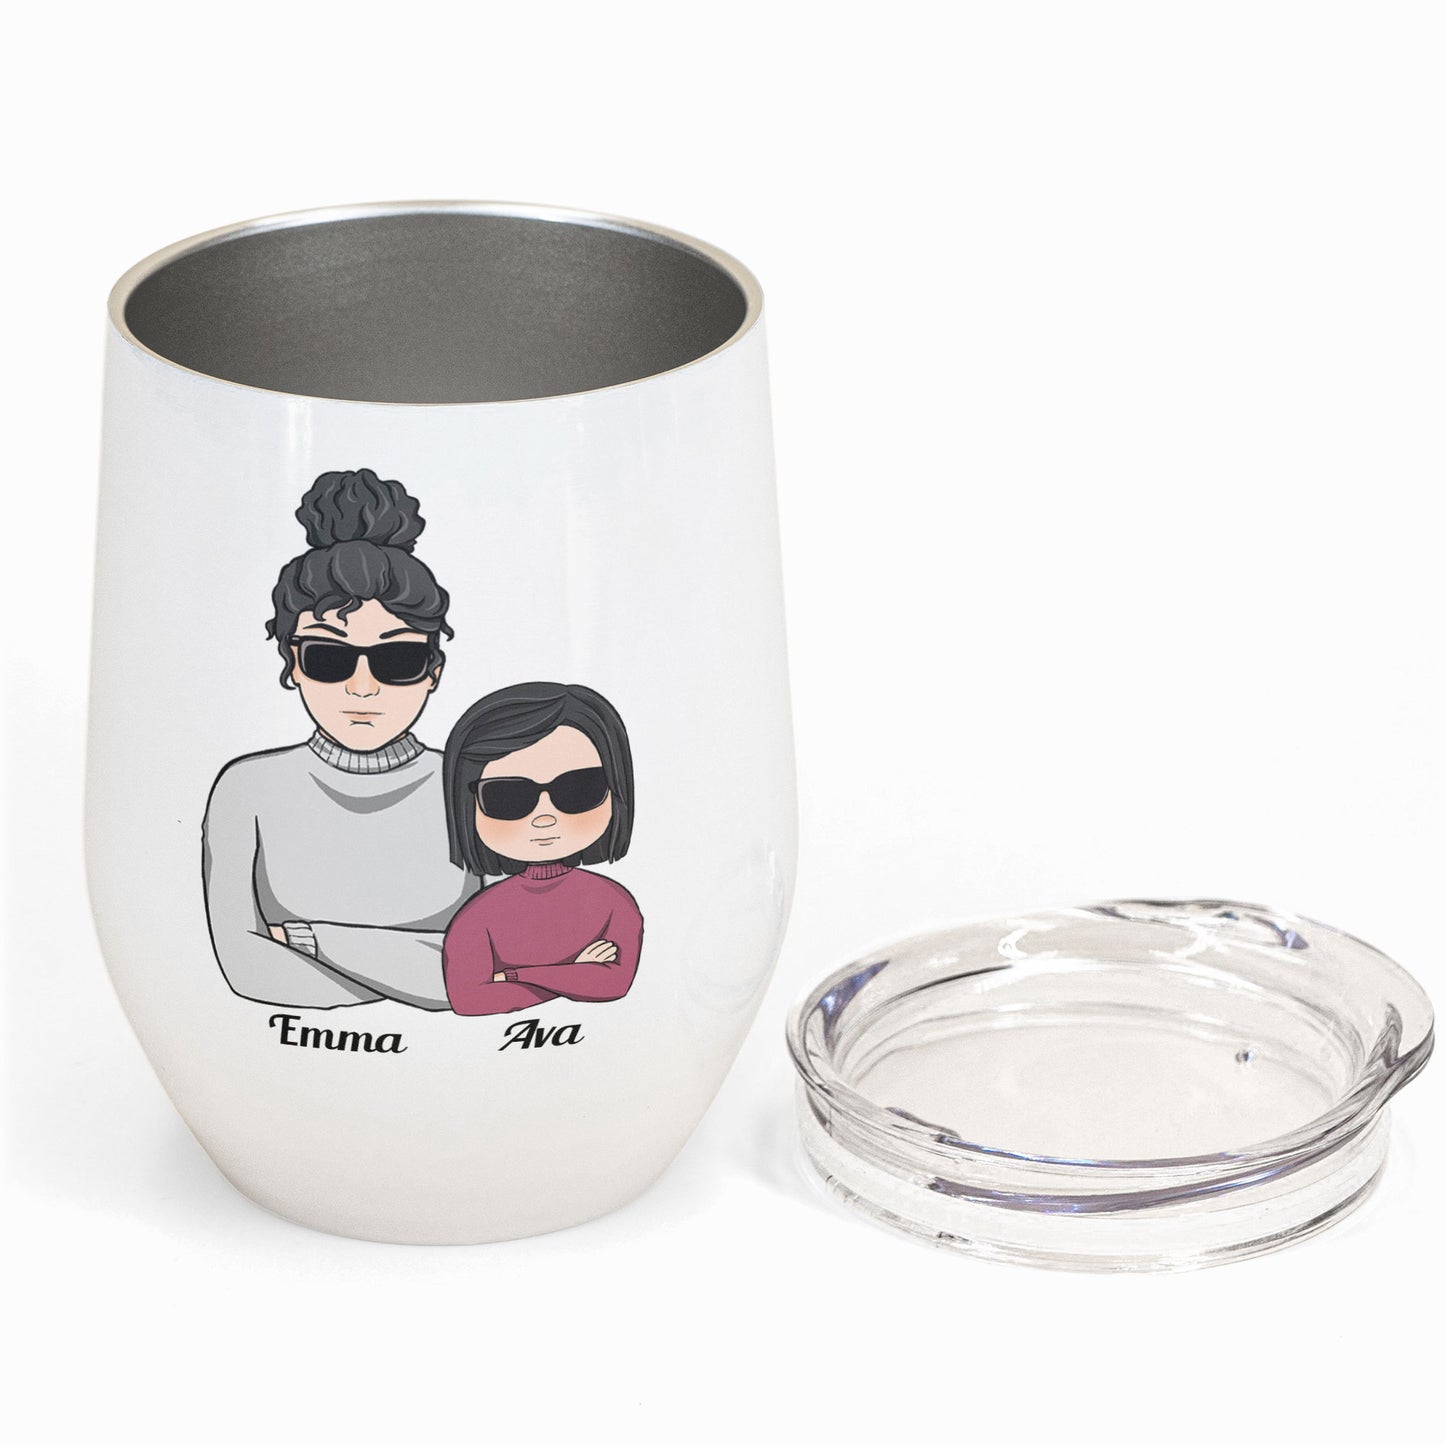 Like Mother Like Daughter - Personalized Mother's Day Mother Wine Tumbler